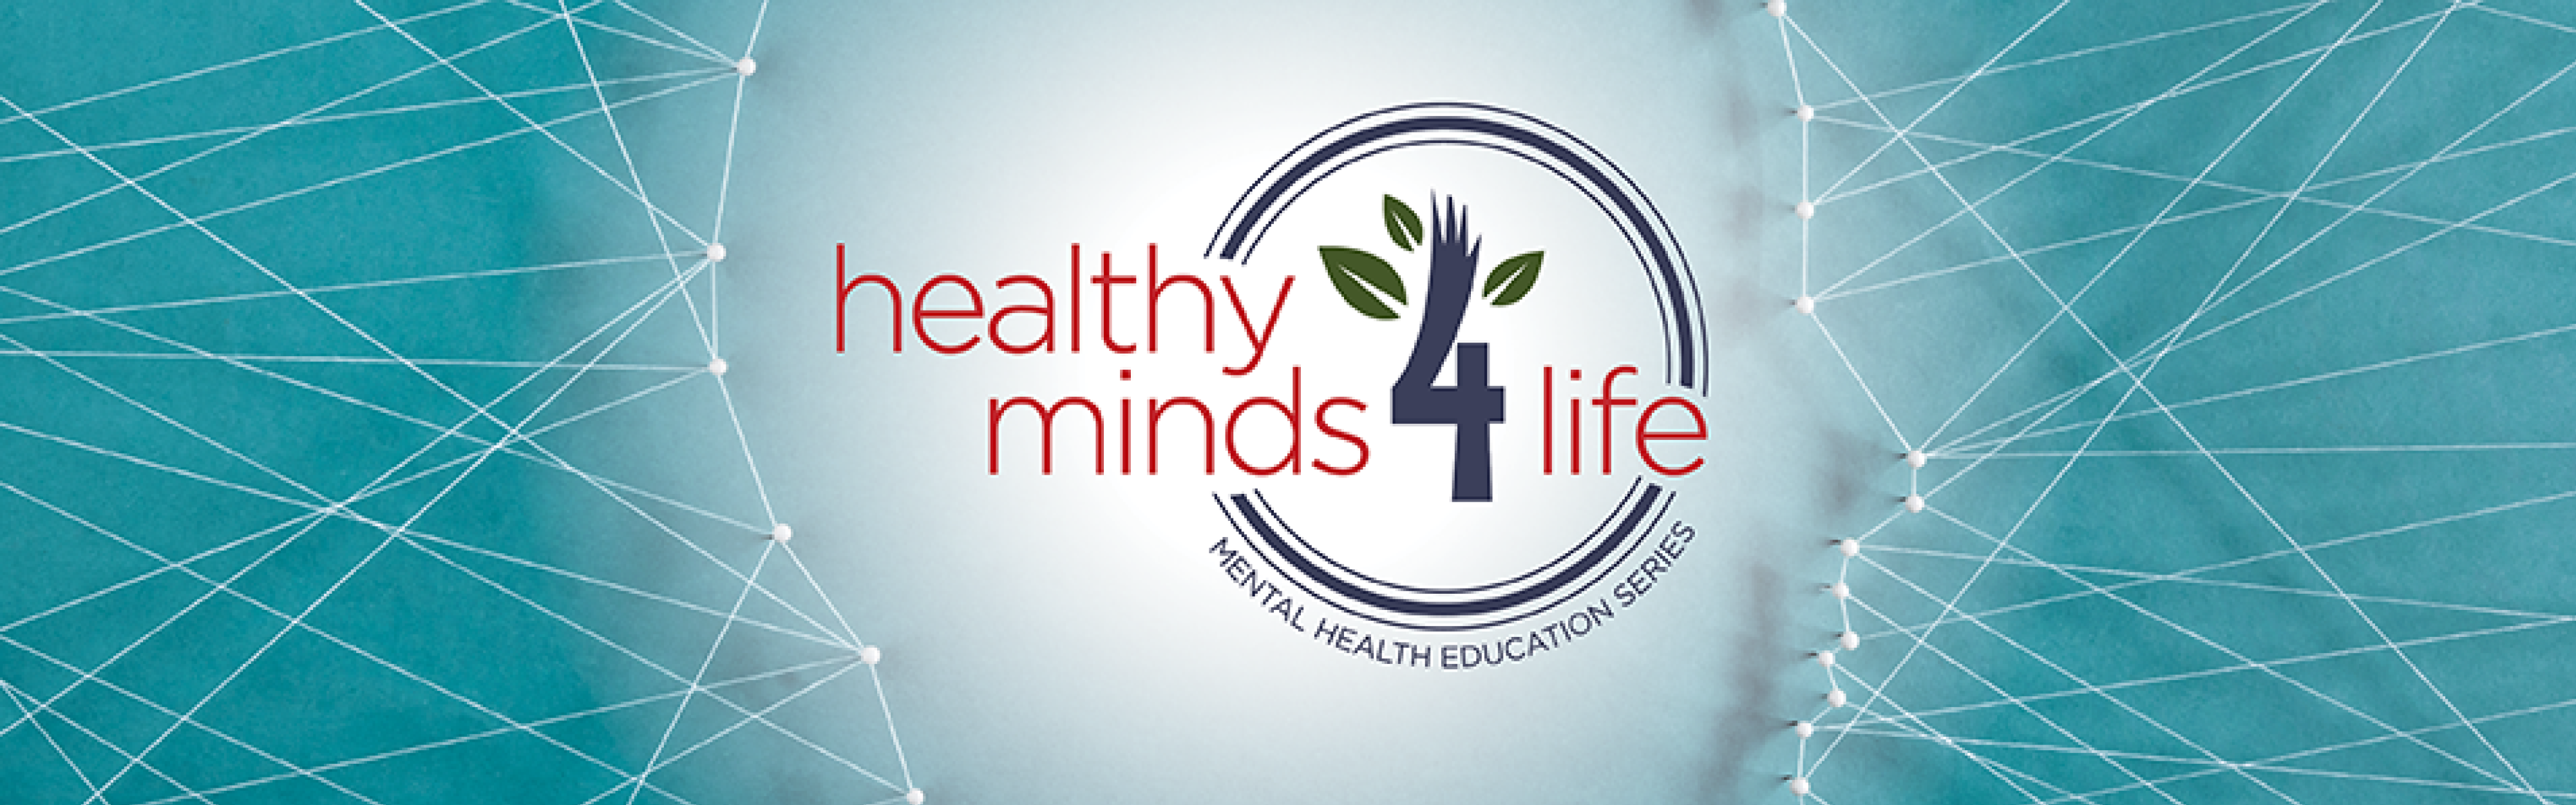 Healthy Minds 4 Life